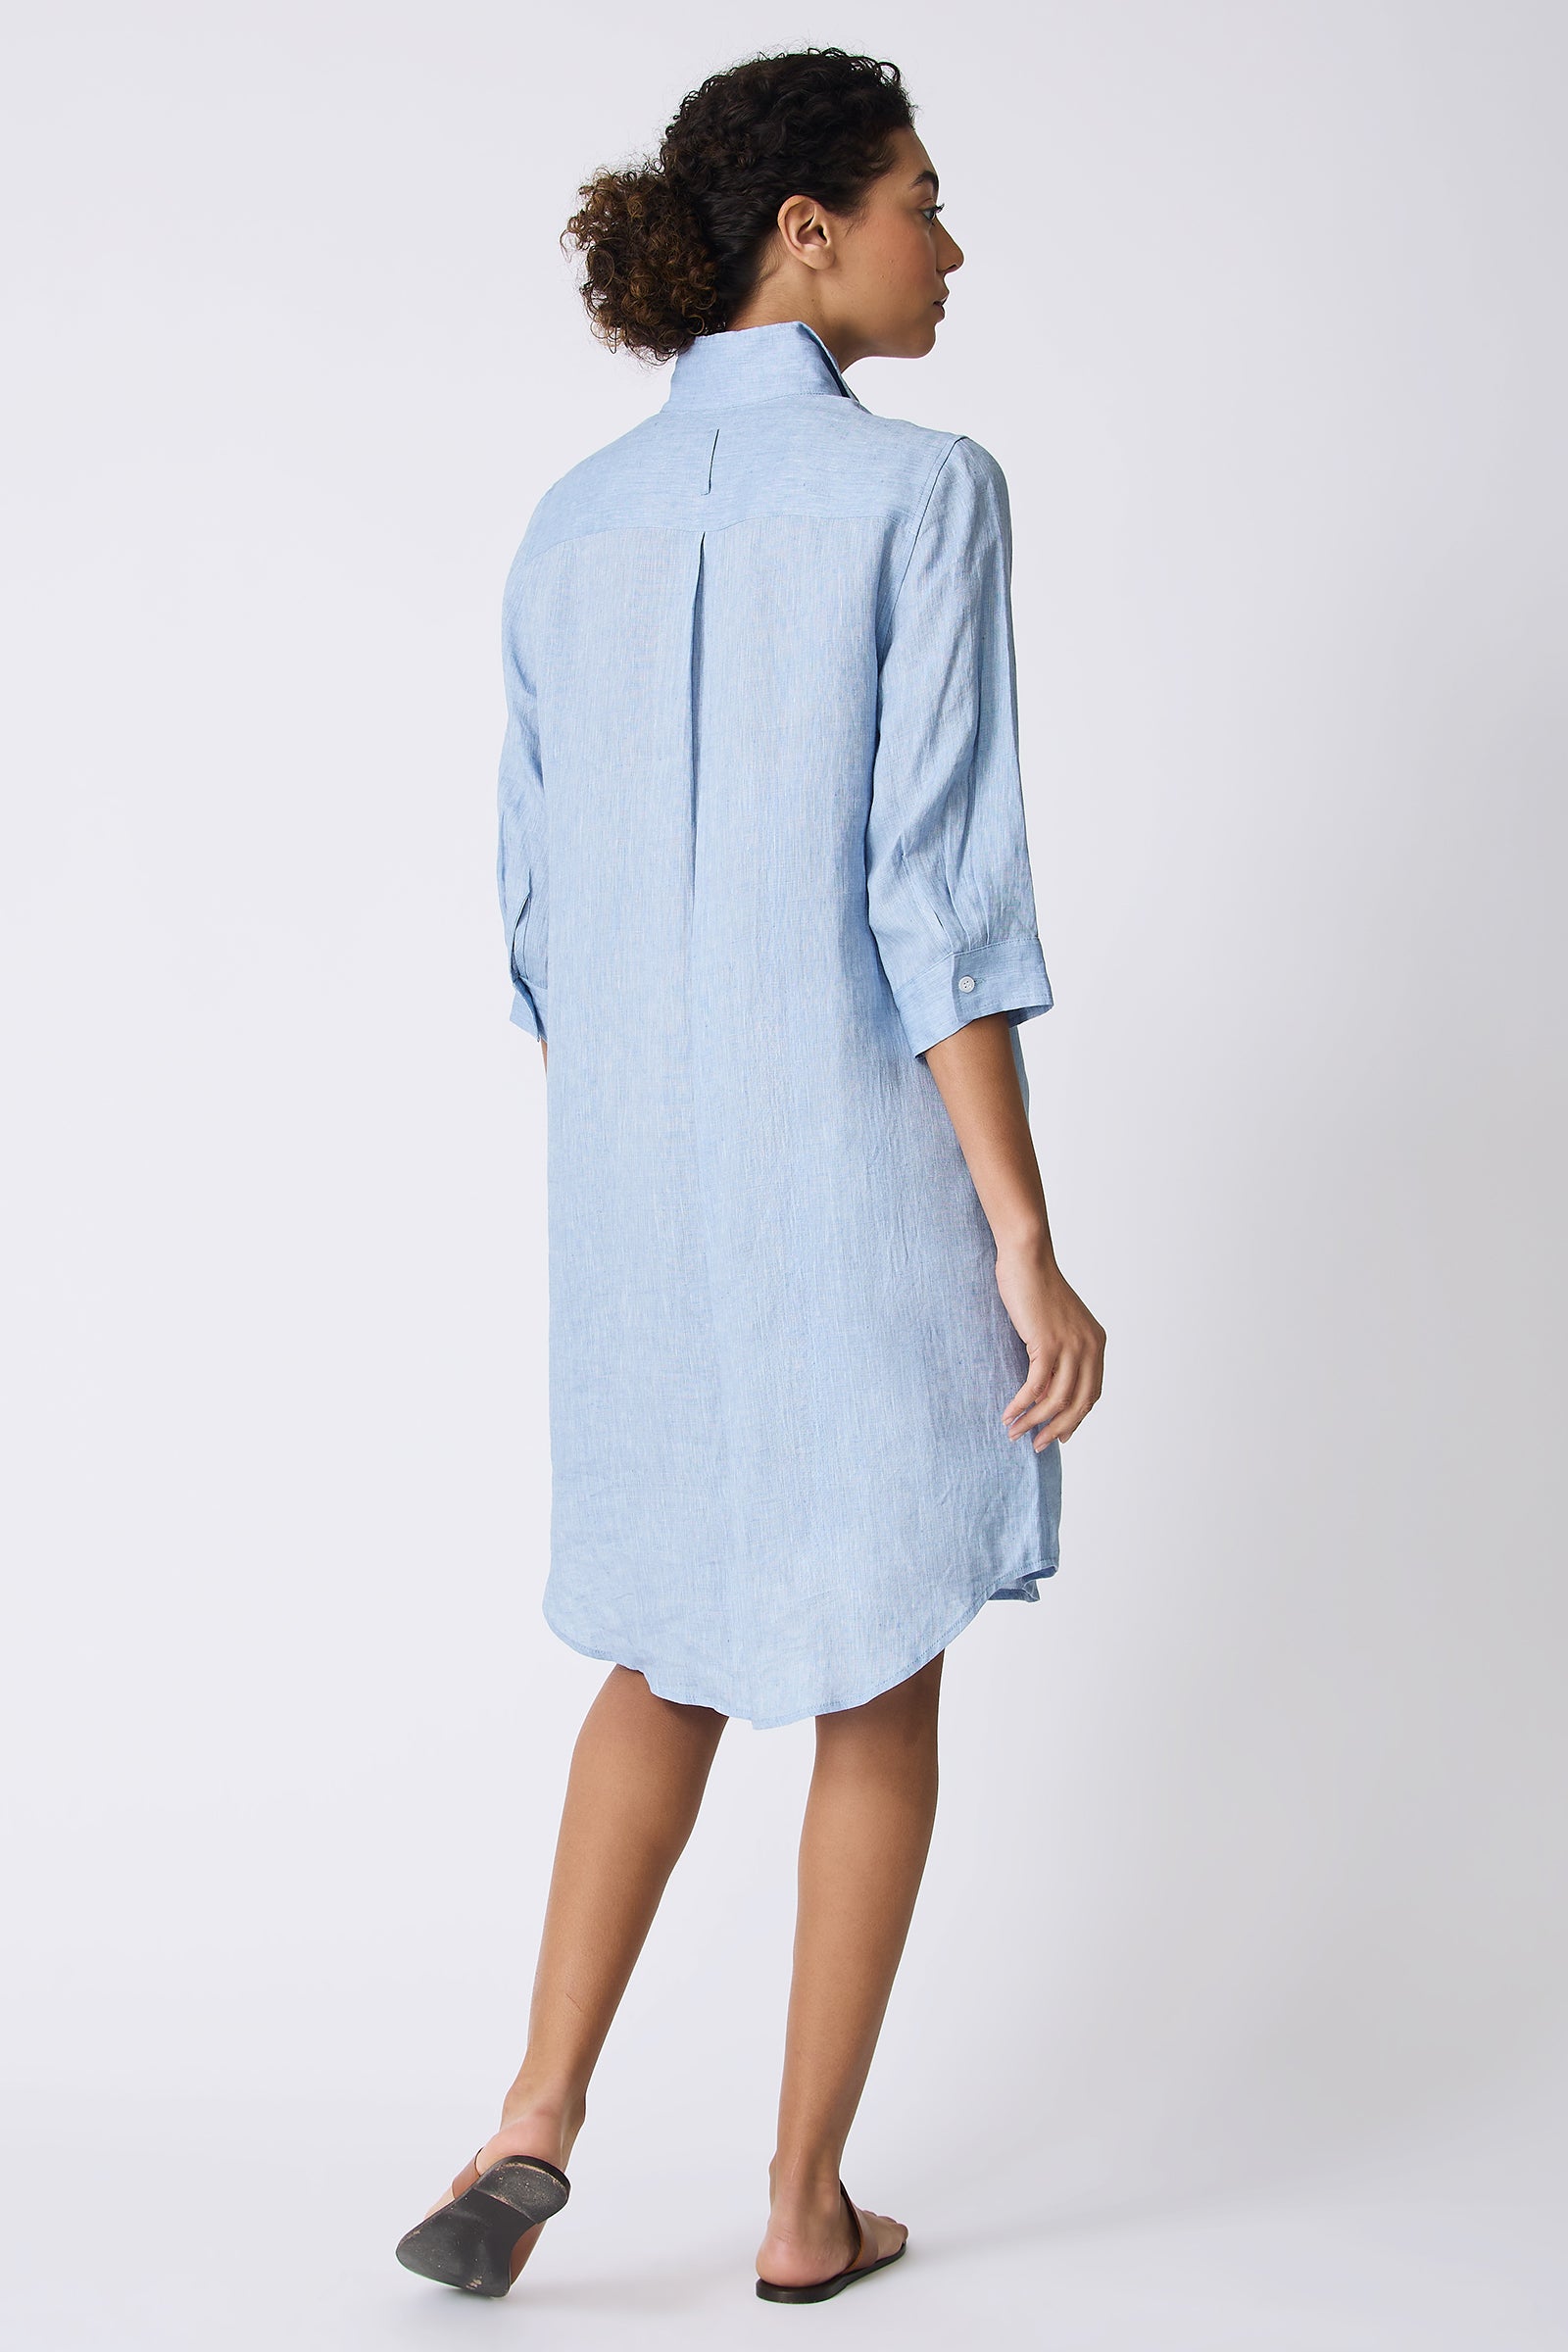 Katie Dress in Sky Blue Japanese Cotton and Tencel Twill – KAL RIEMAN